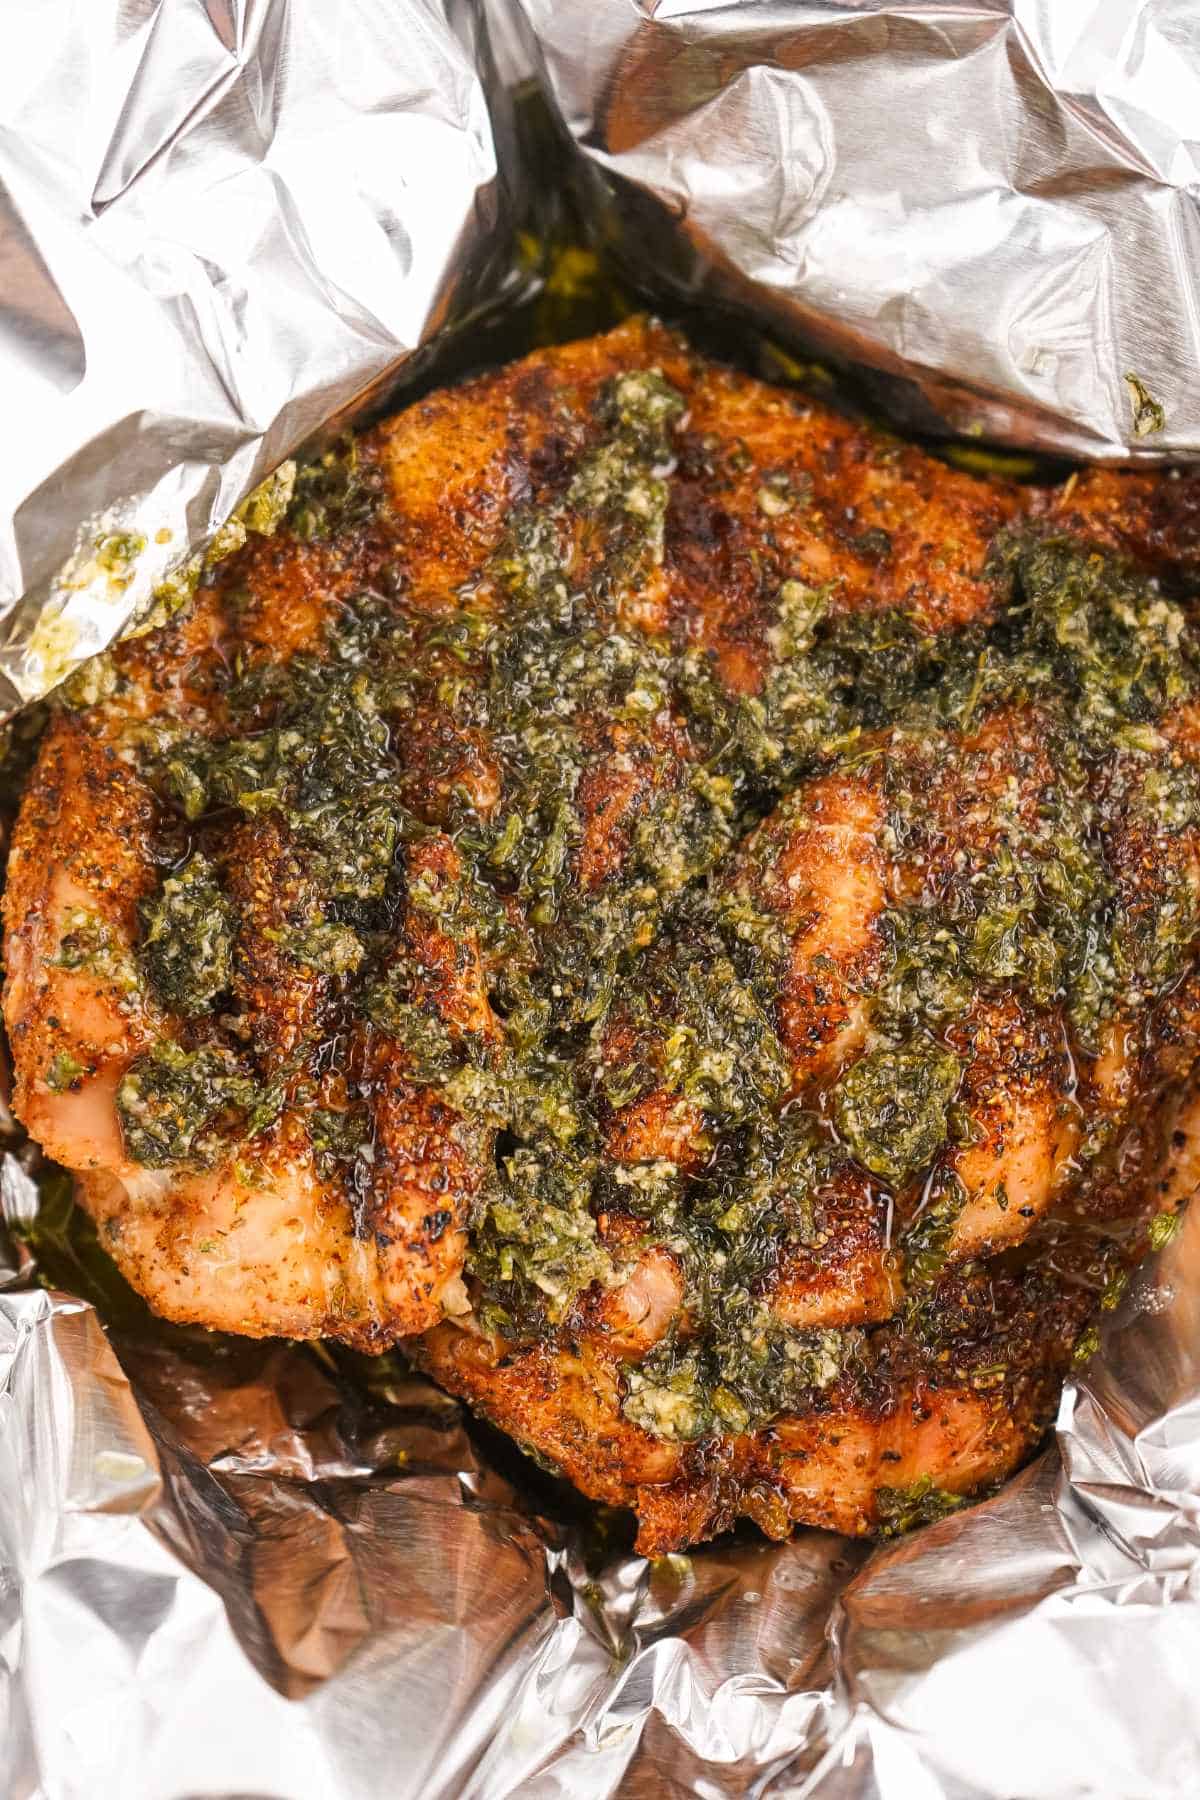 smoked turkey breast with herb crusted top in aluminum foil.